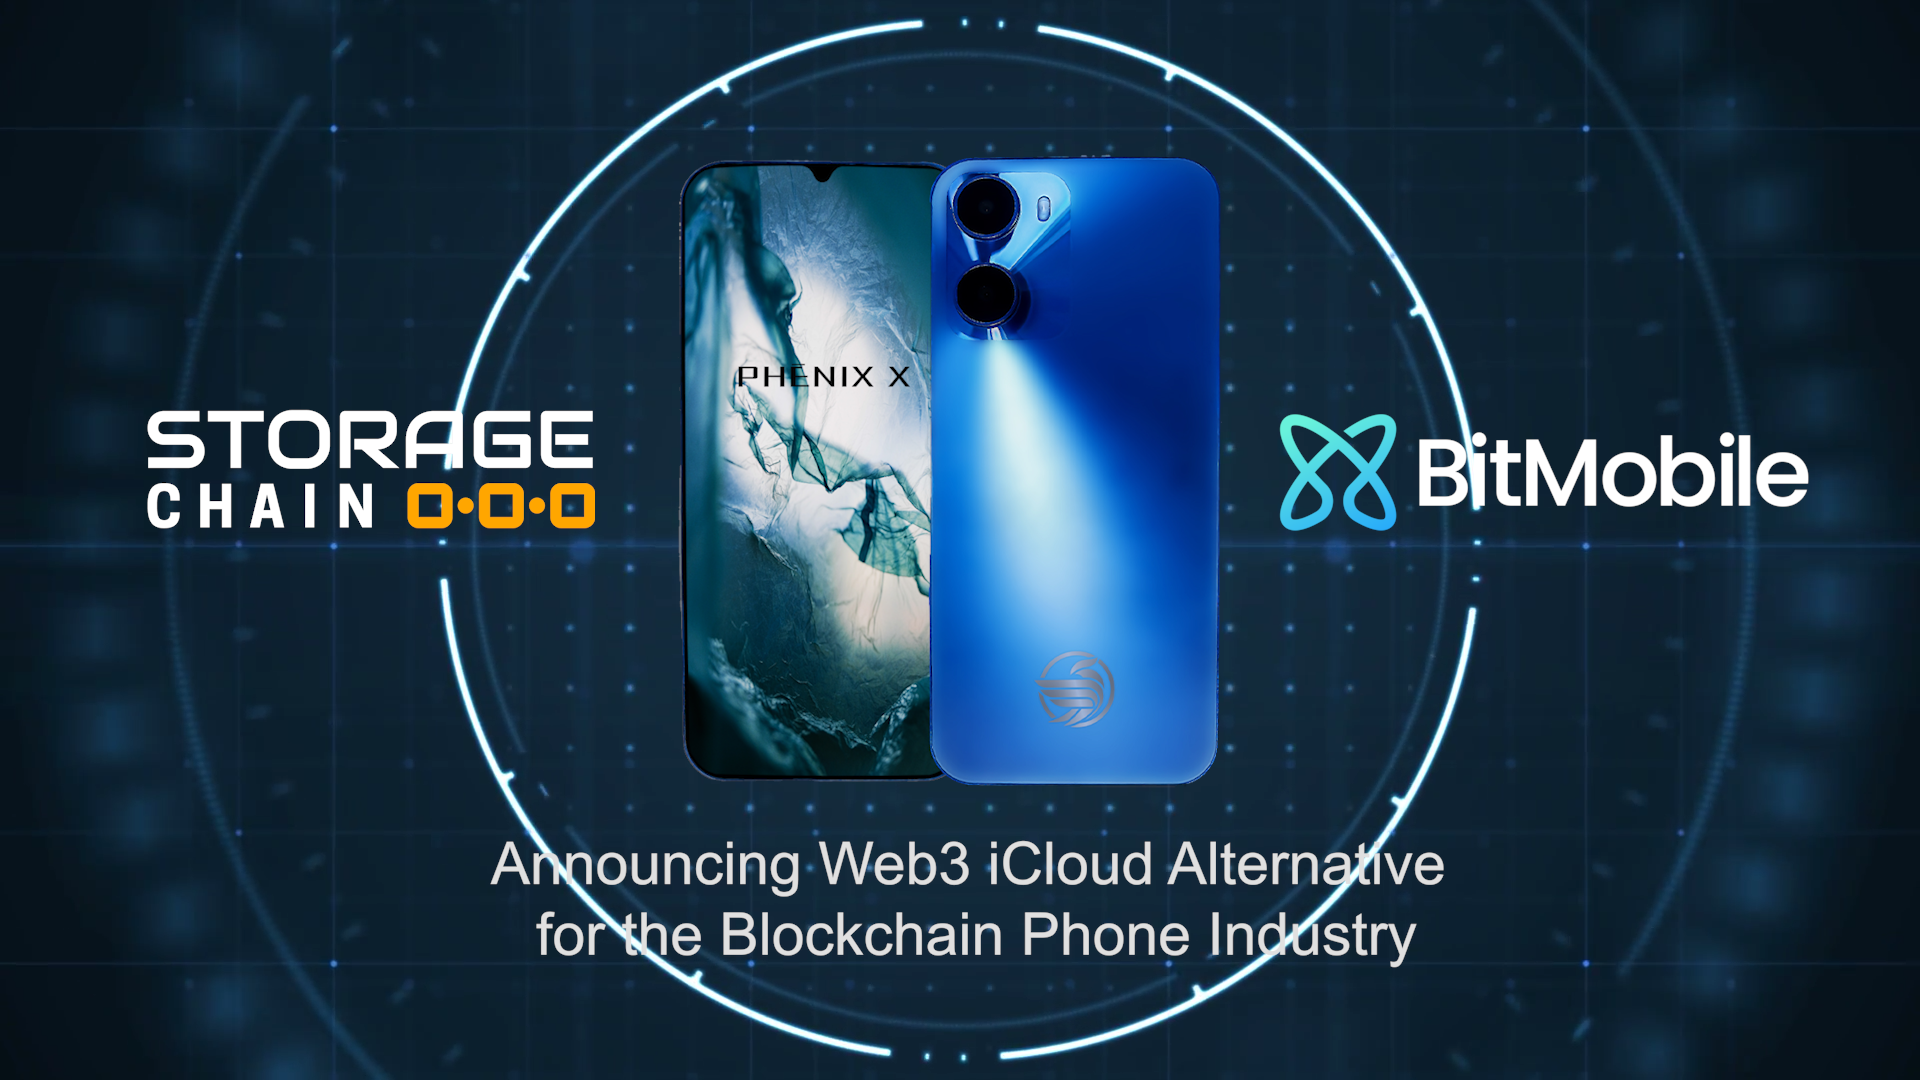 StorageChain will be the Web3 Decentralized Cloud of the incoming Phenix X